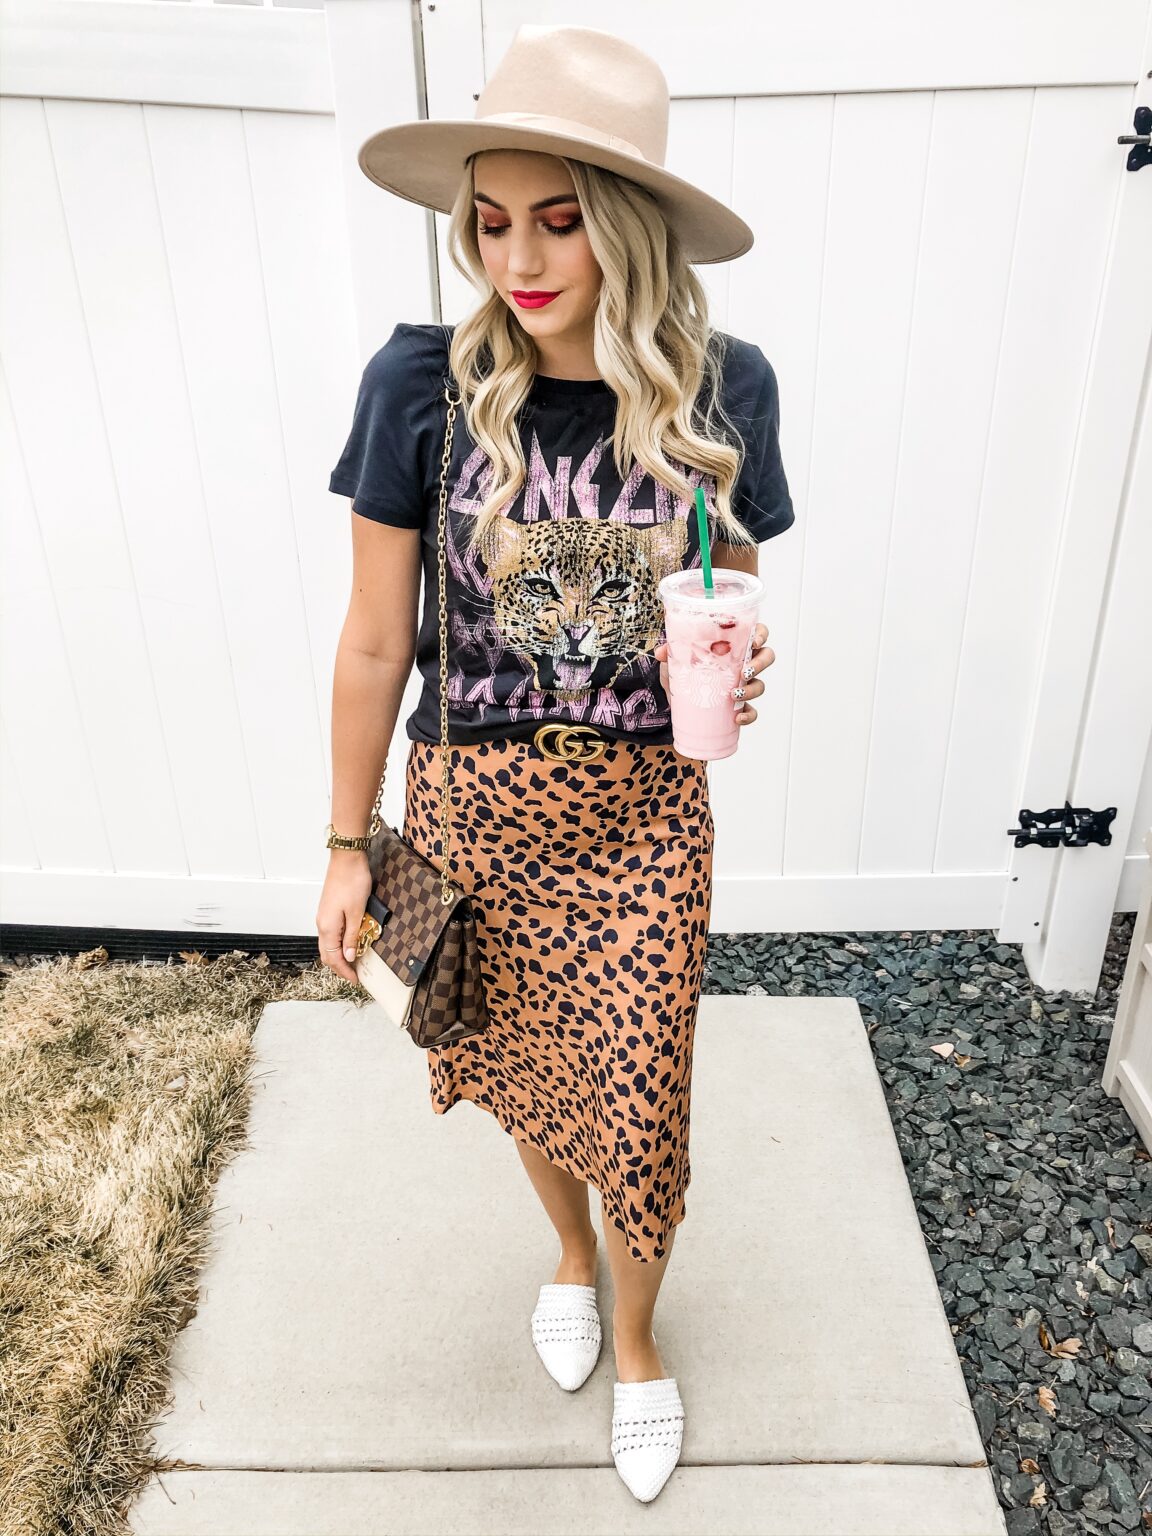 10 Ways to Style a Graphic Tee - Z93